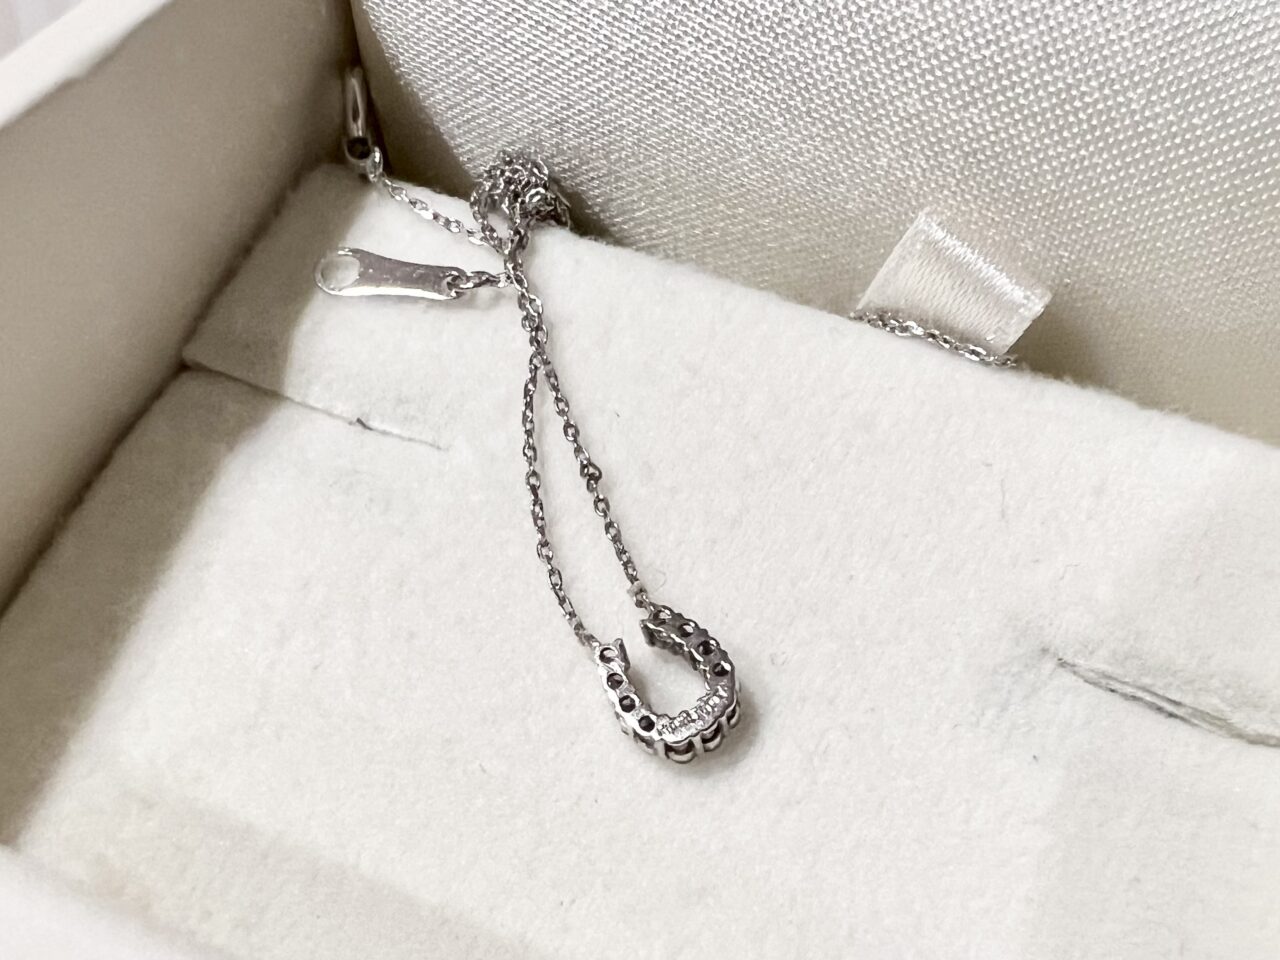 LK JewelryのBABY馬蹄ネックレスの裏面